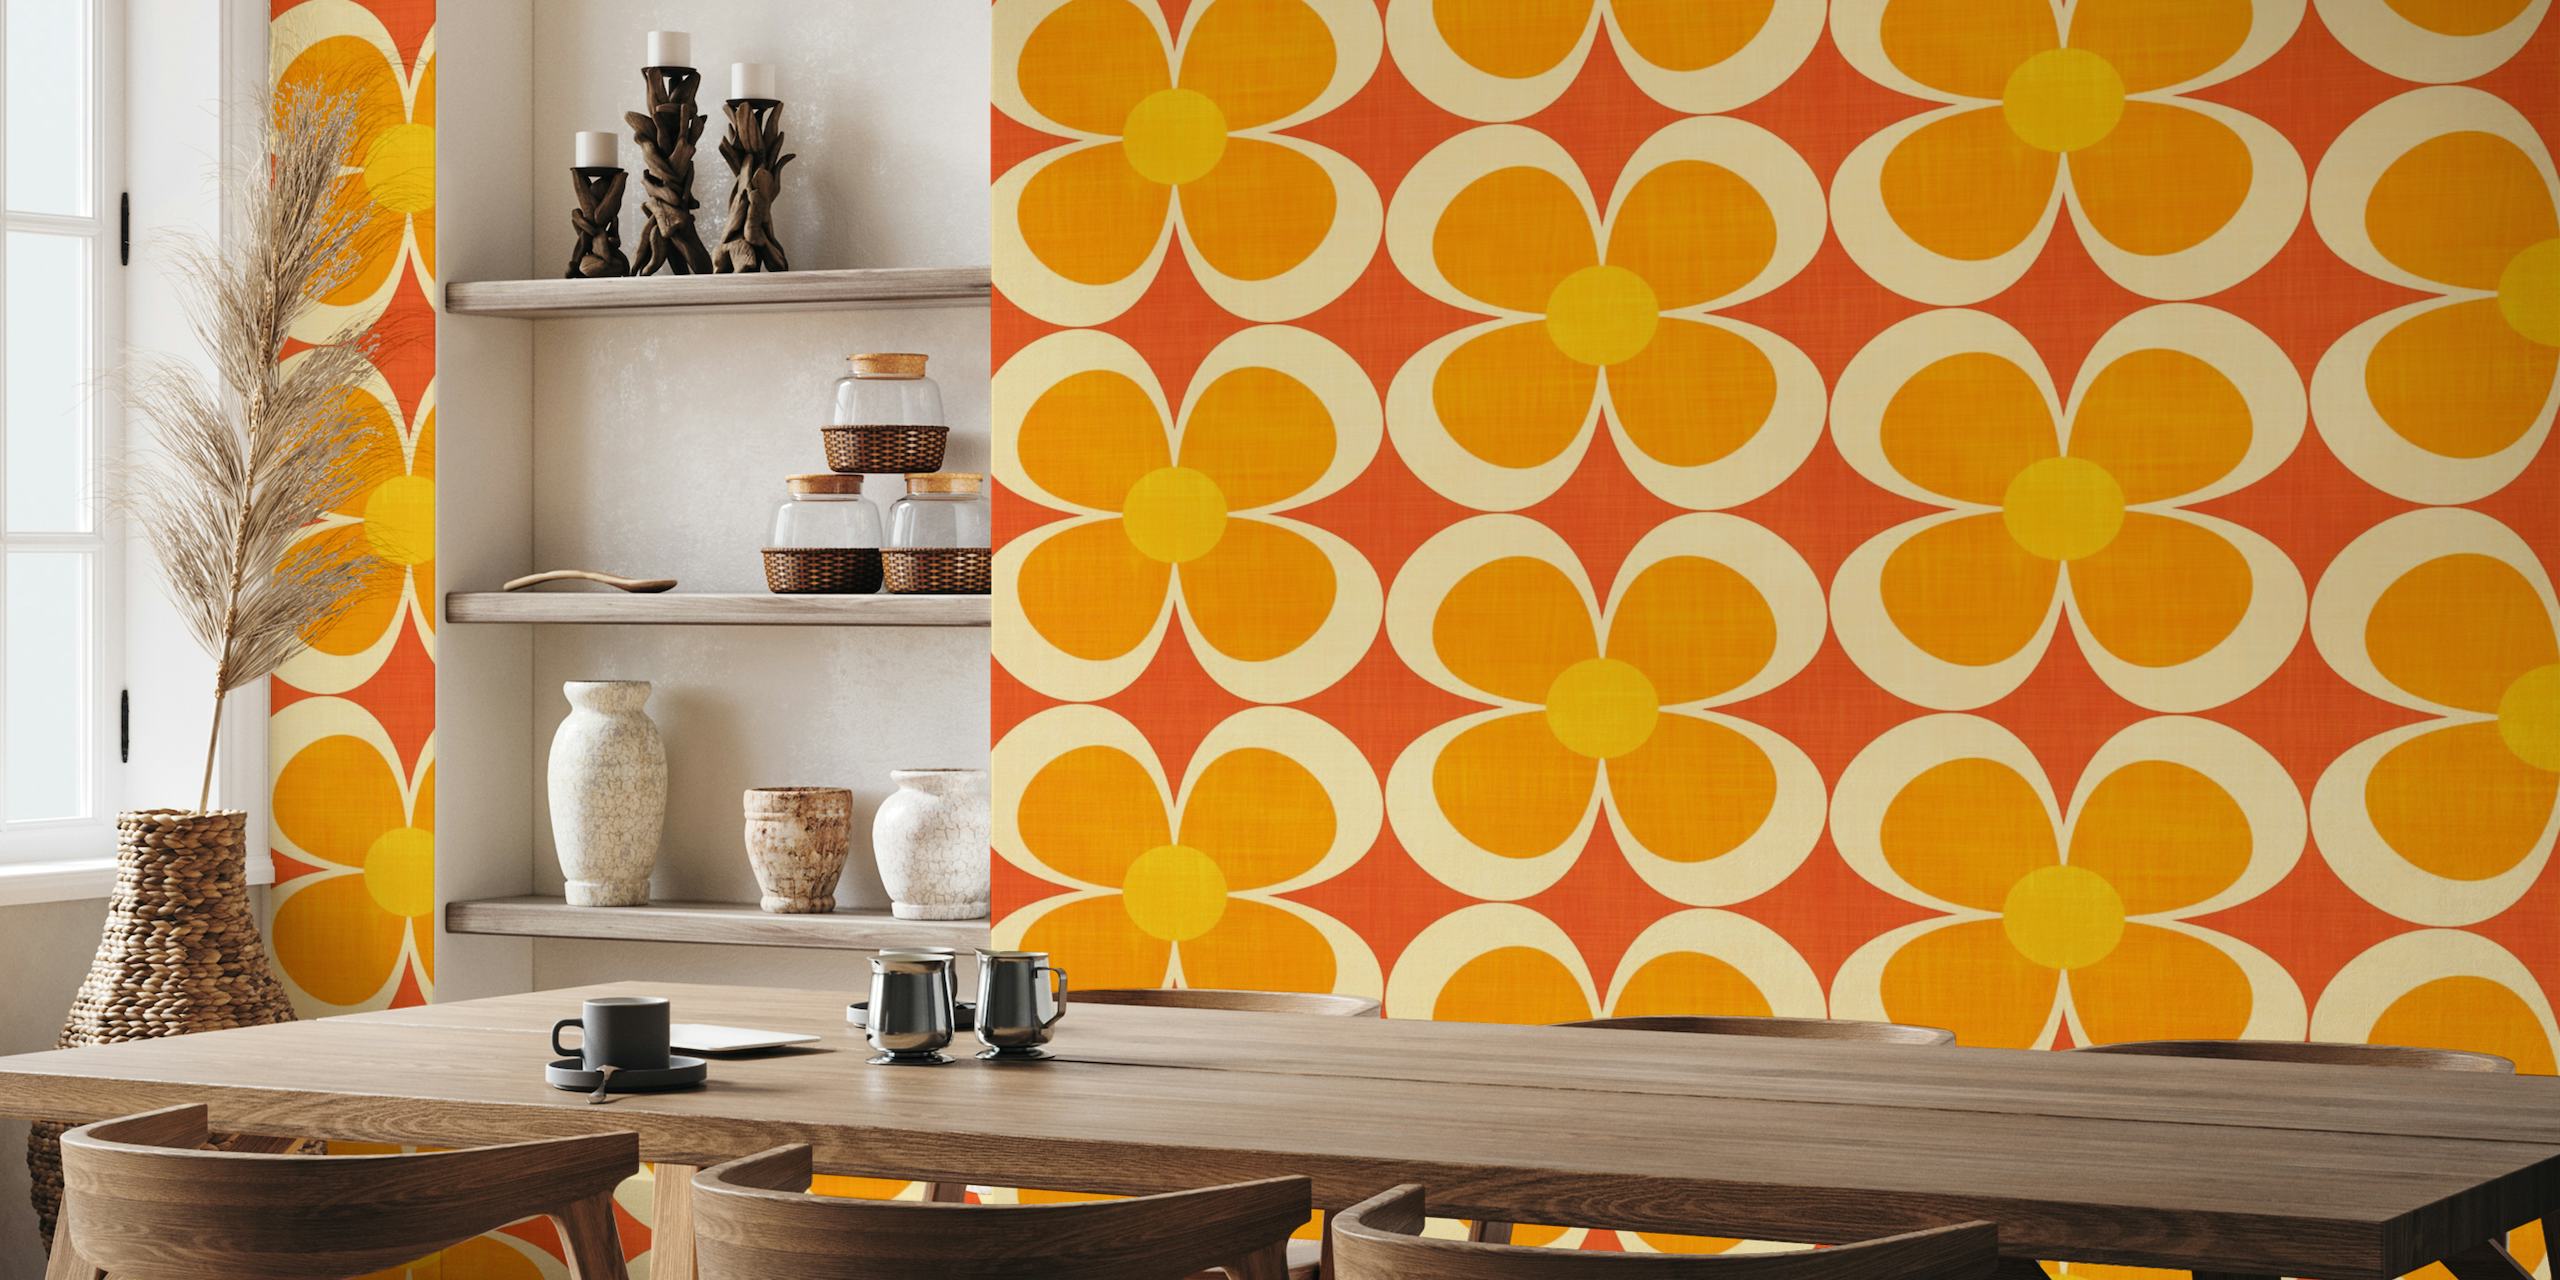 Retro-inspired Groovy Geometric Floral wall mural in orange, yellow, and red